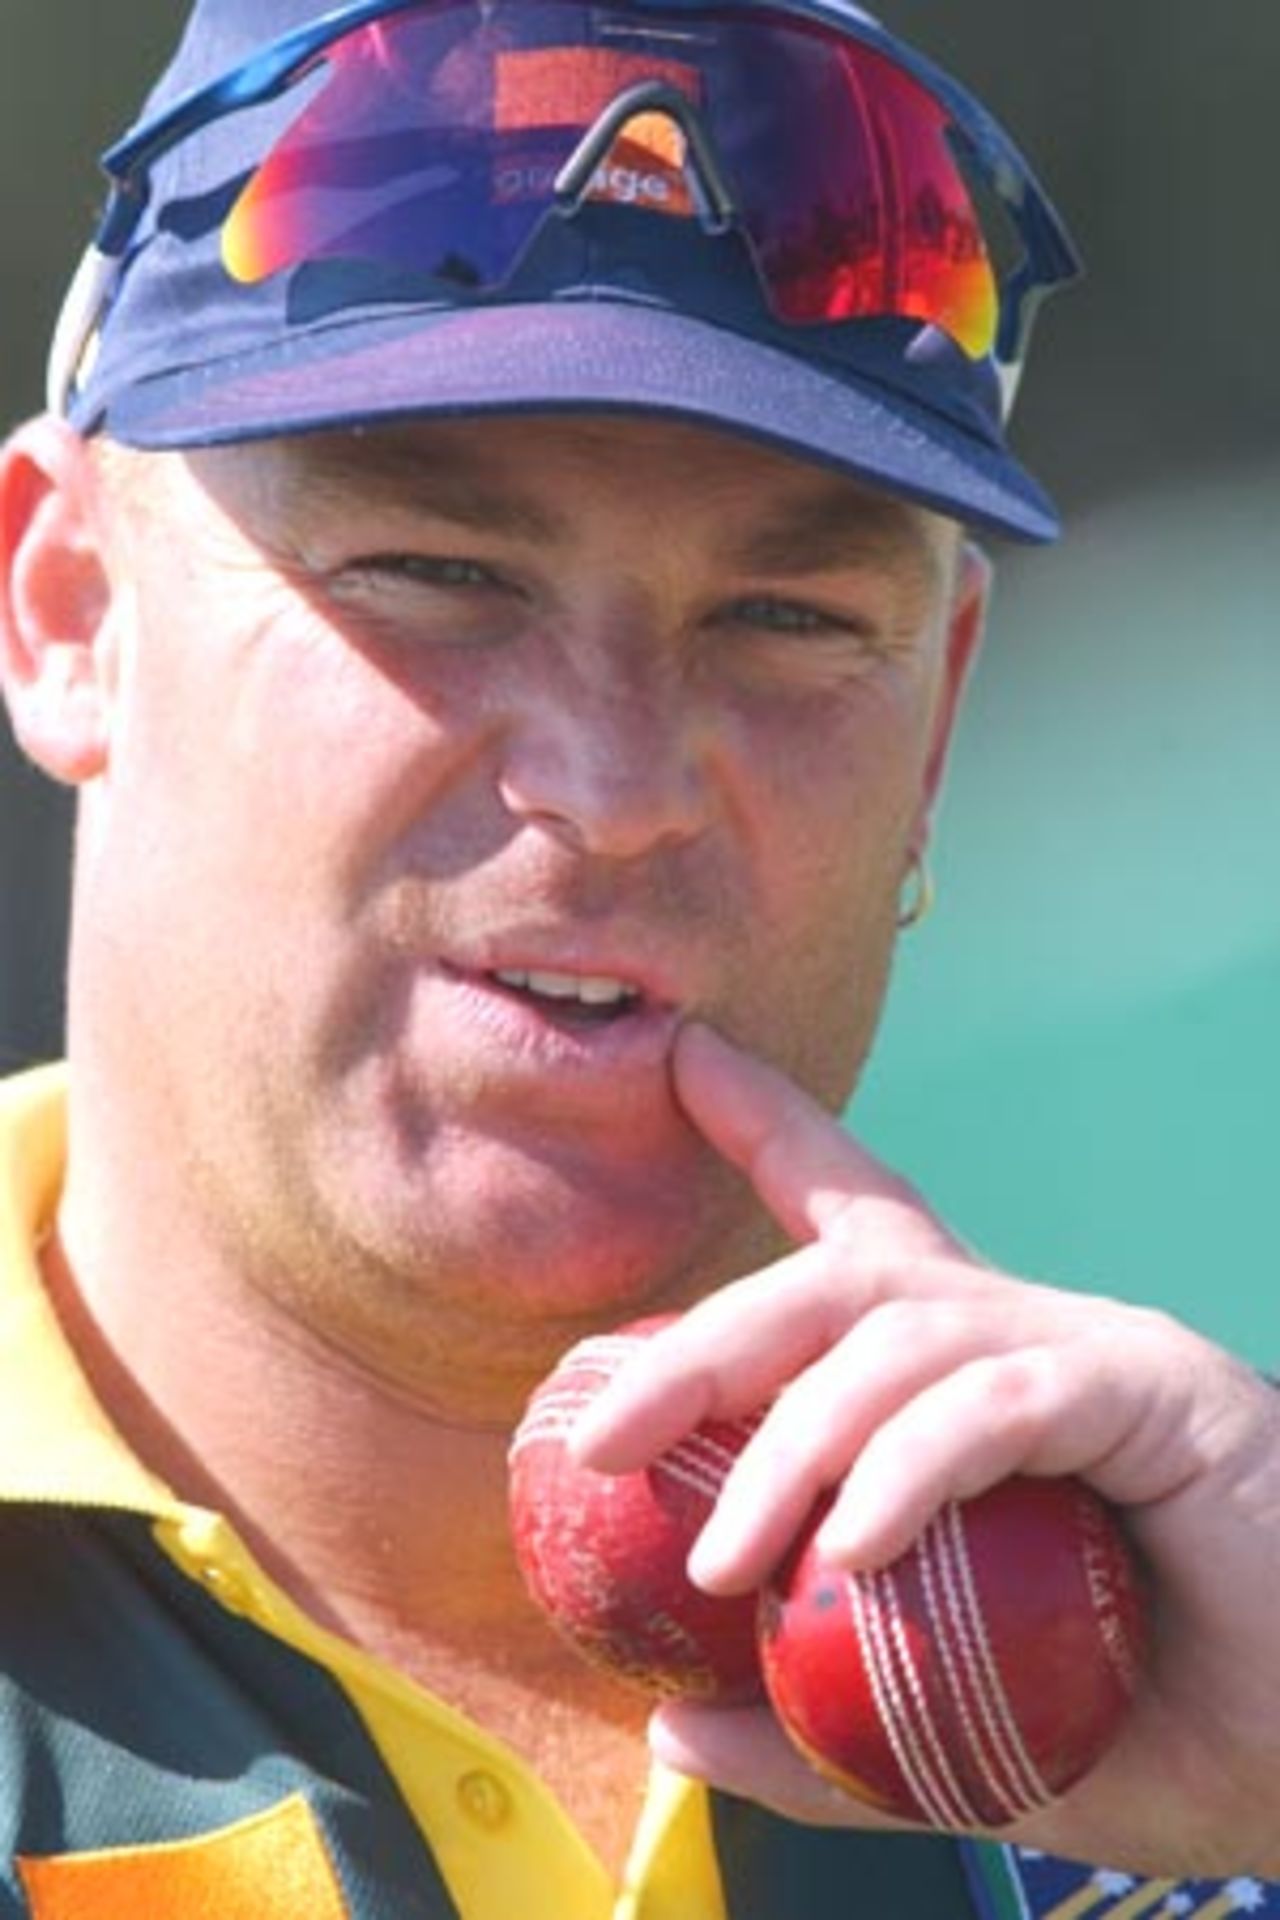 6 Nov 2001: Shane Warne of Australia in action during training for the Australian Cricket team in preperation for the first test against New Zealand. The Training session was held at the Allan Border Field in Brisbane, Australia.